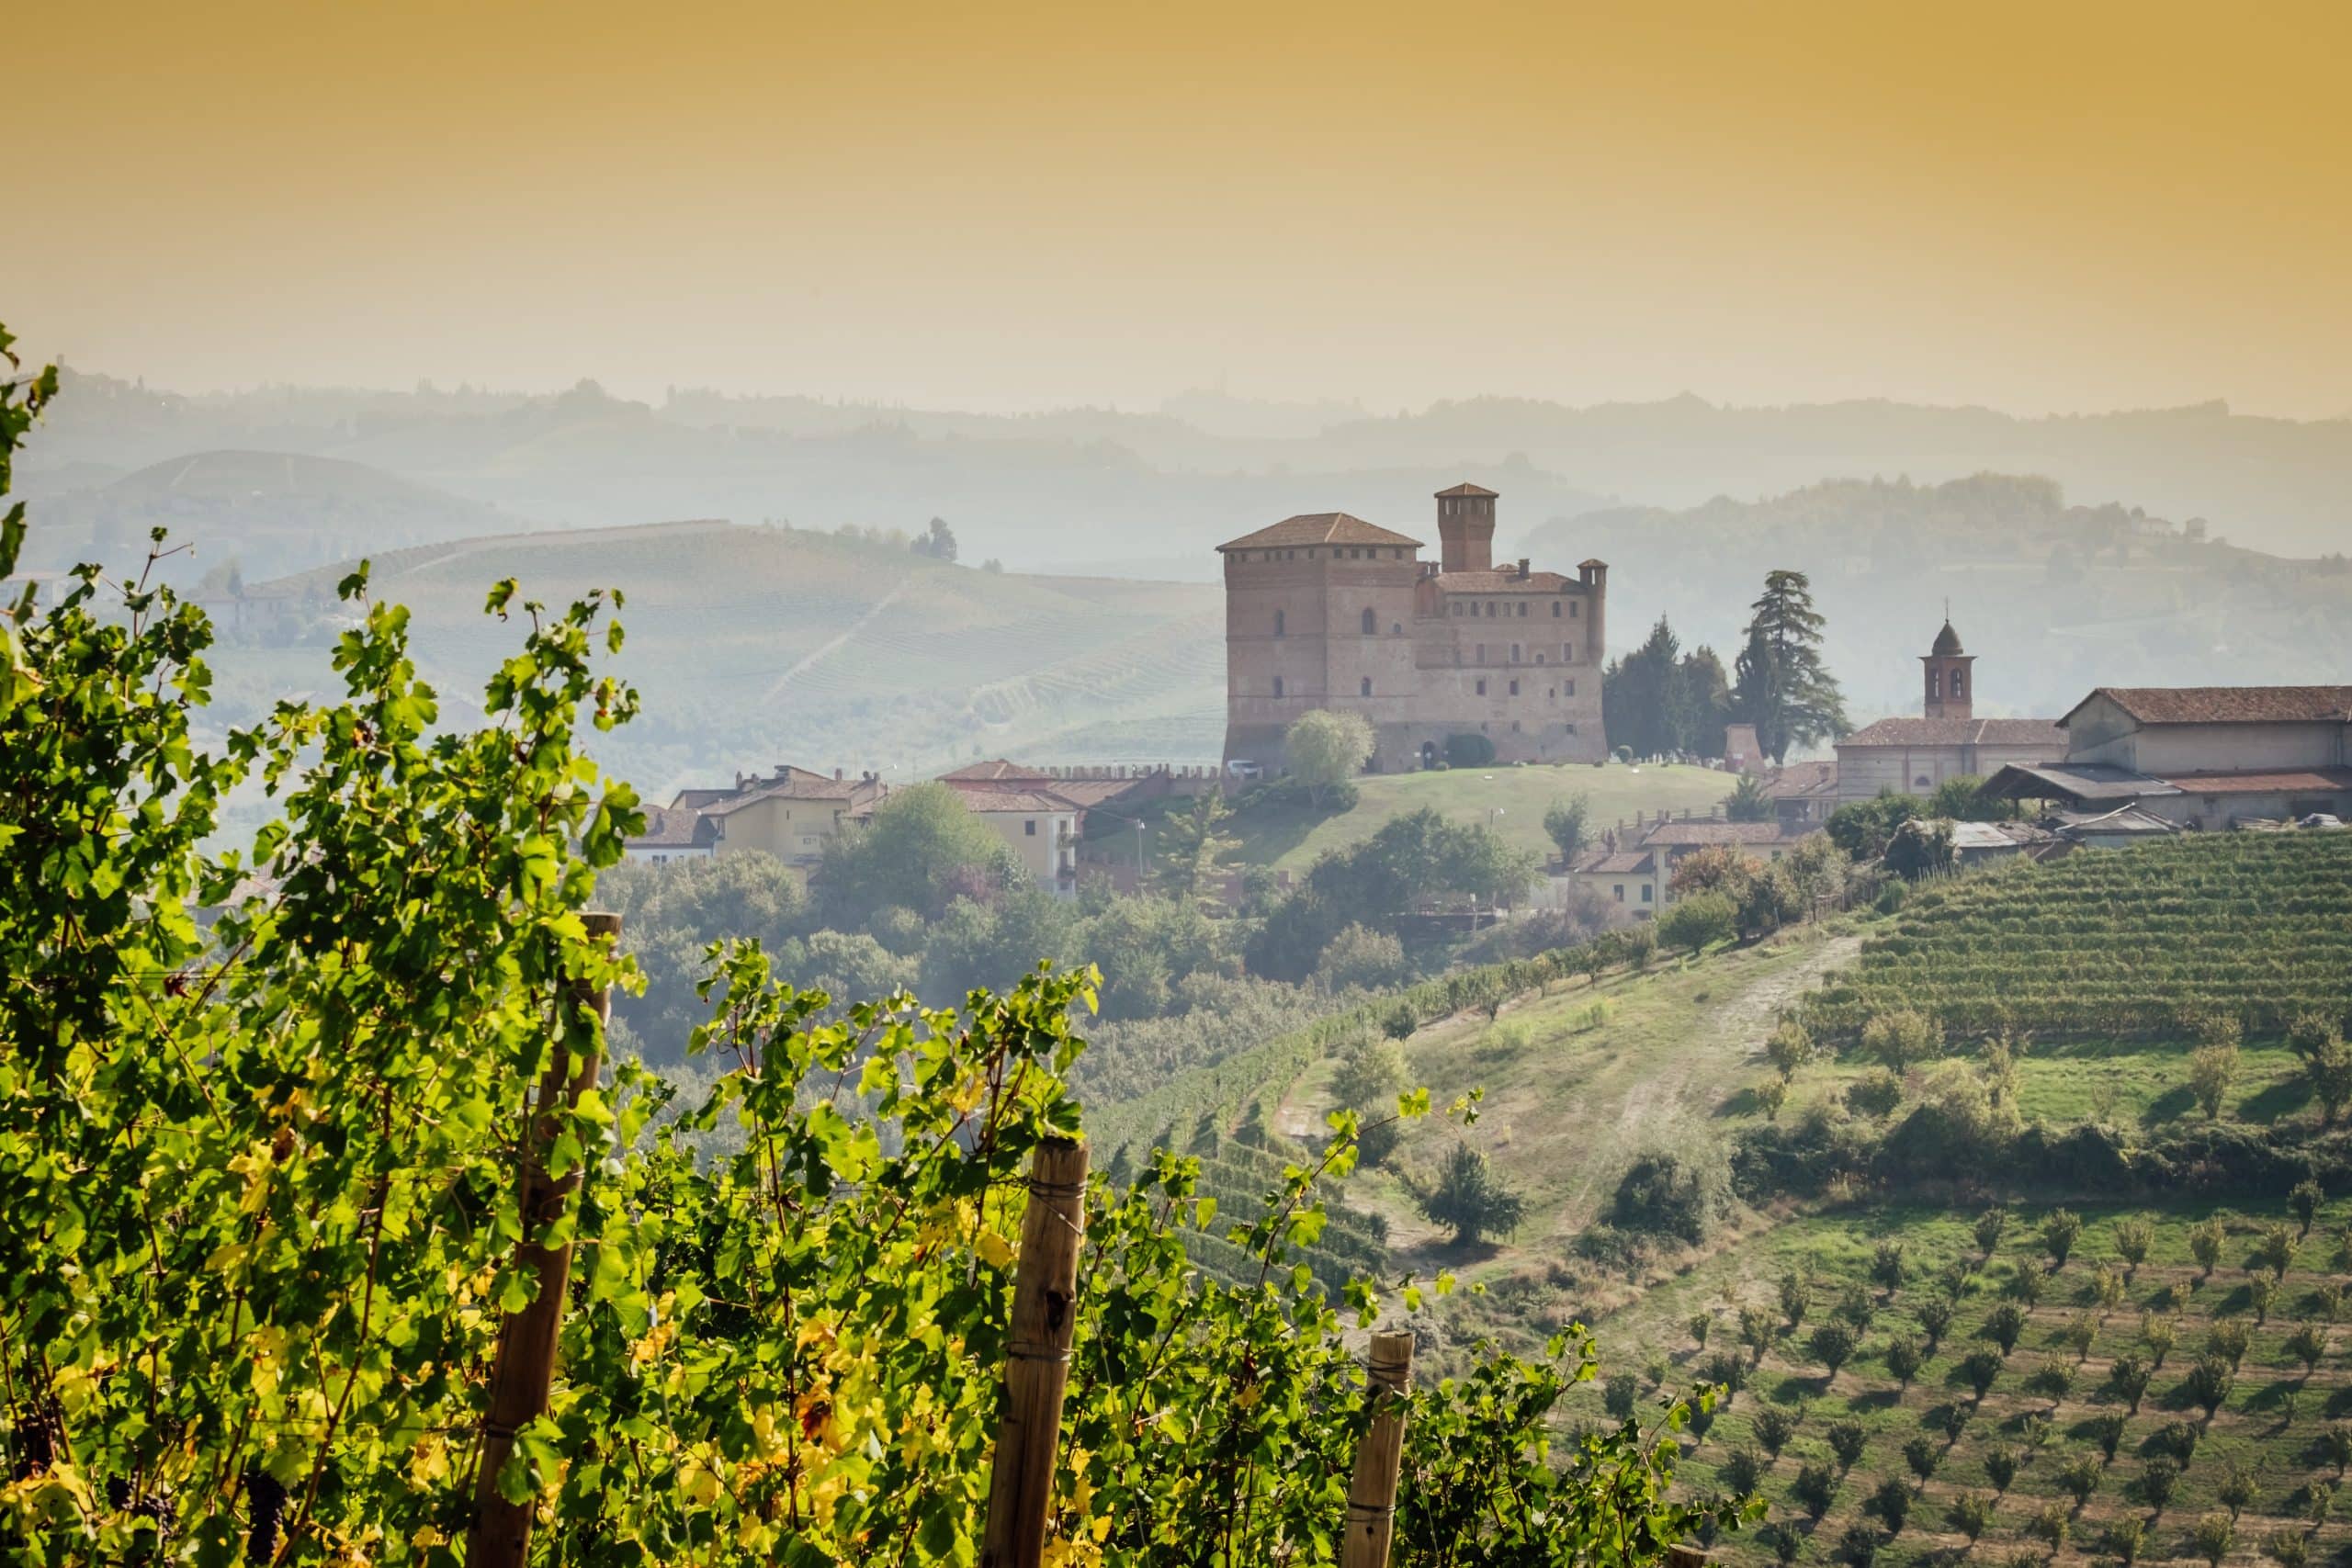 Panoramic view of the Langhe vineyards with Grinzane Cavour Cast